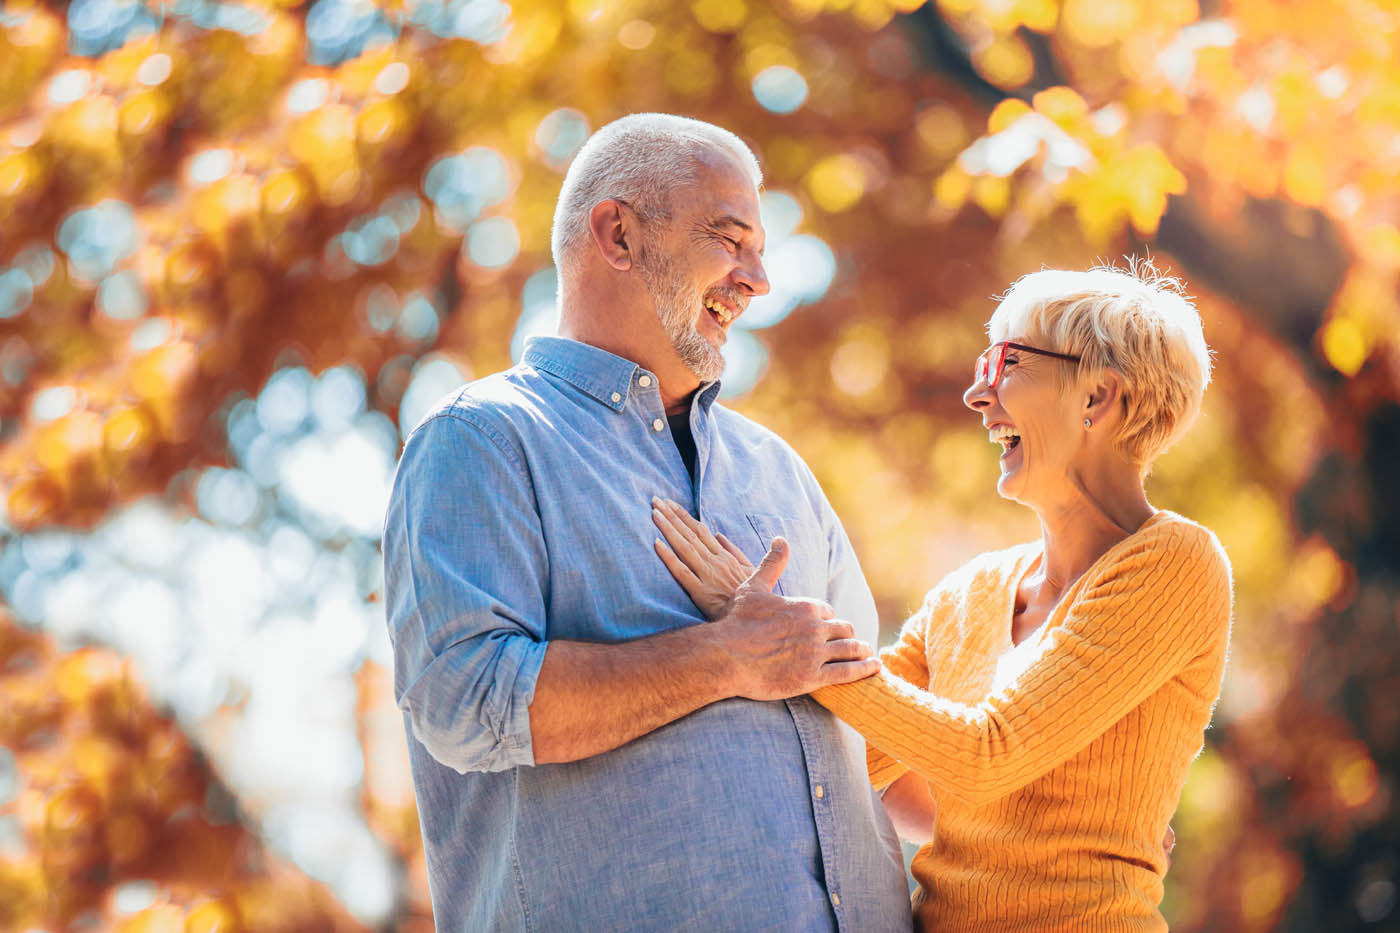 Two older people outside in the fall weather - loving each other and the affects of bbl photofacial in Scottsdale.